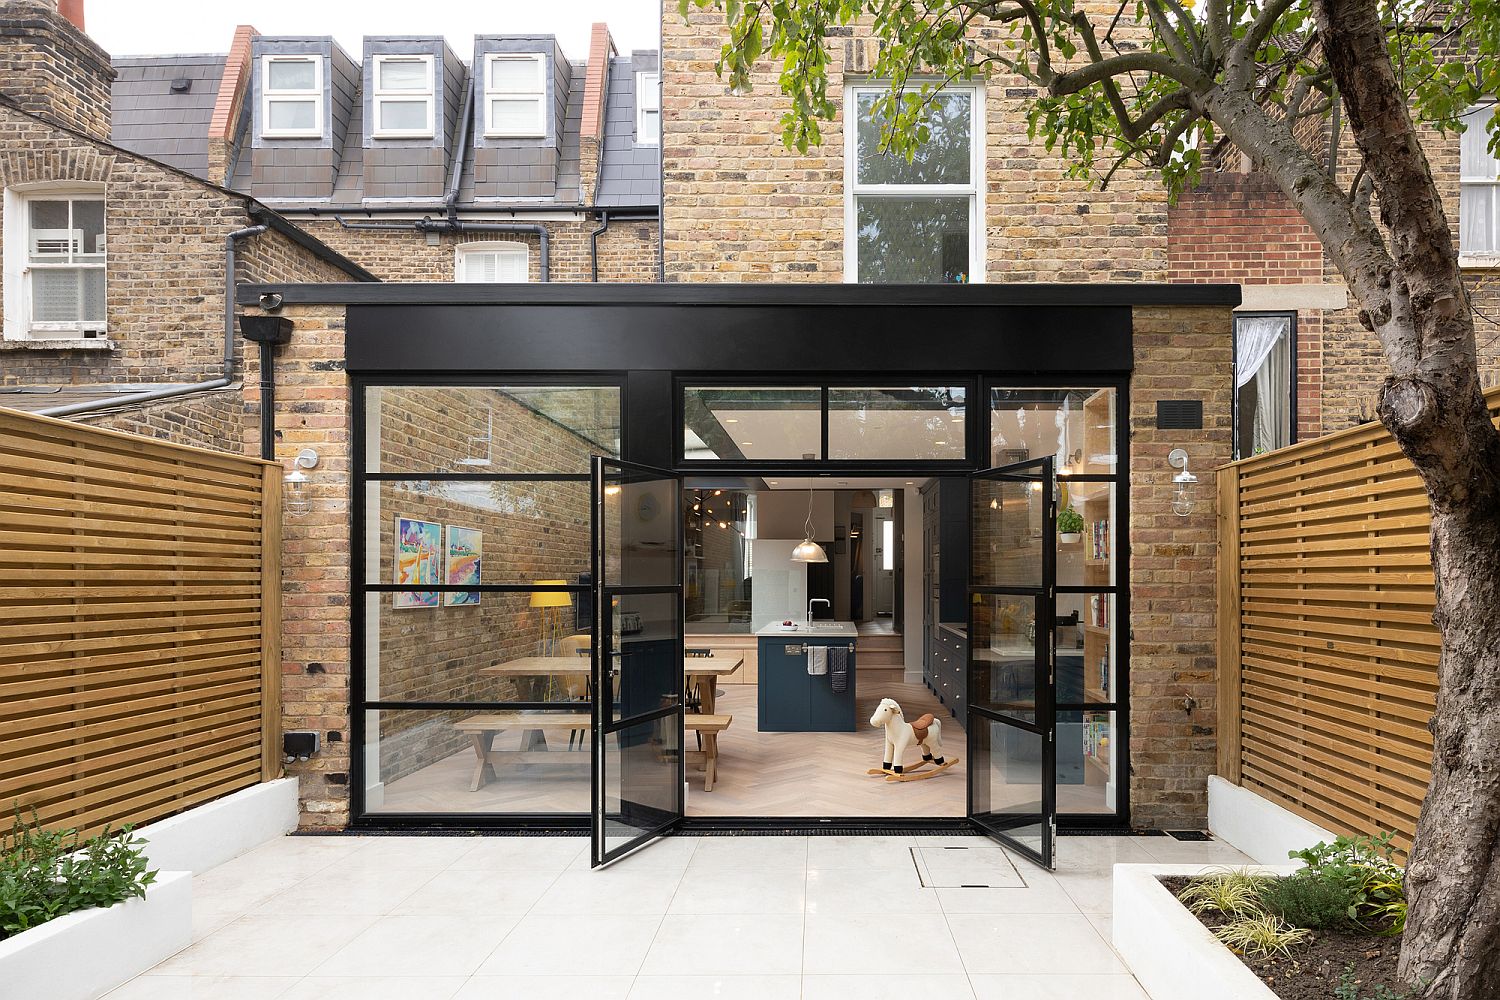 Small Terraced House in London with modern rear glass extension